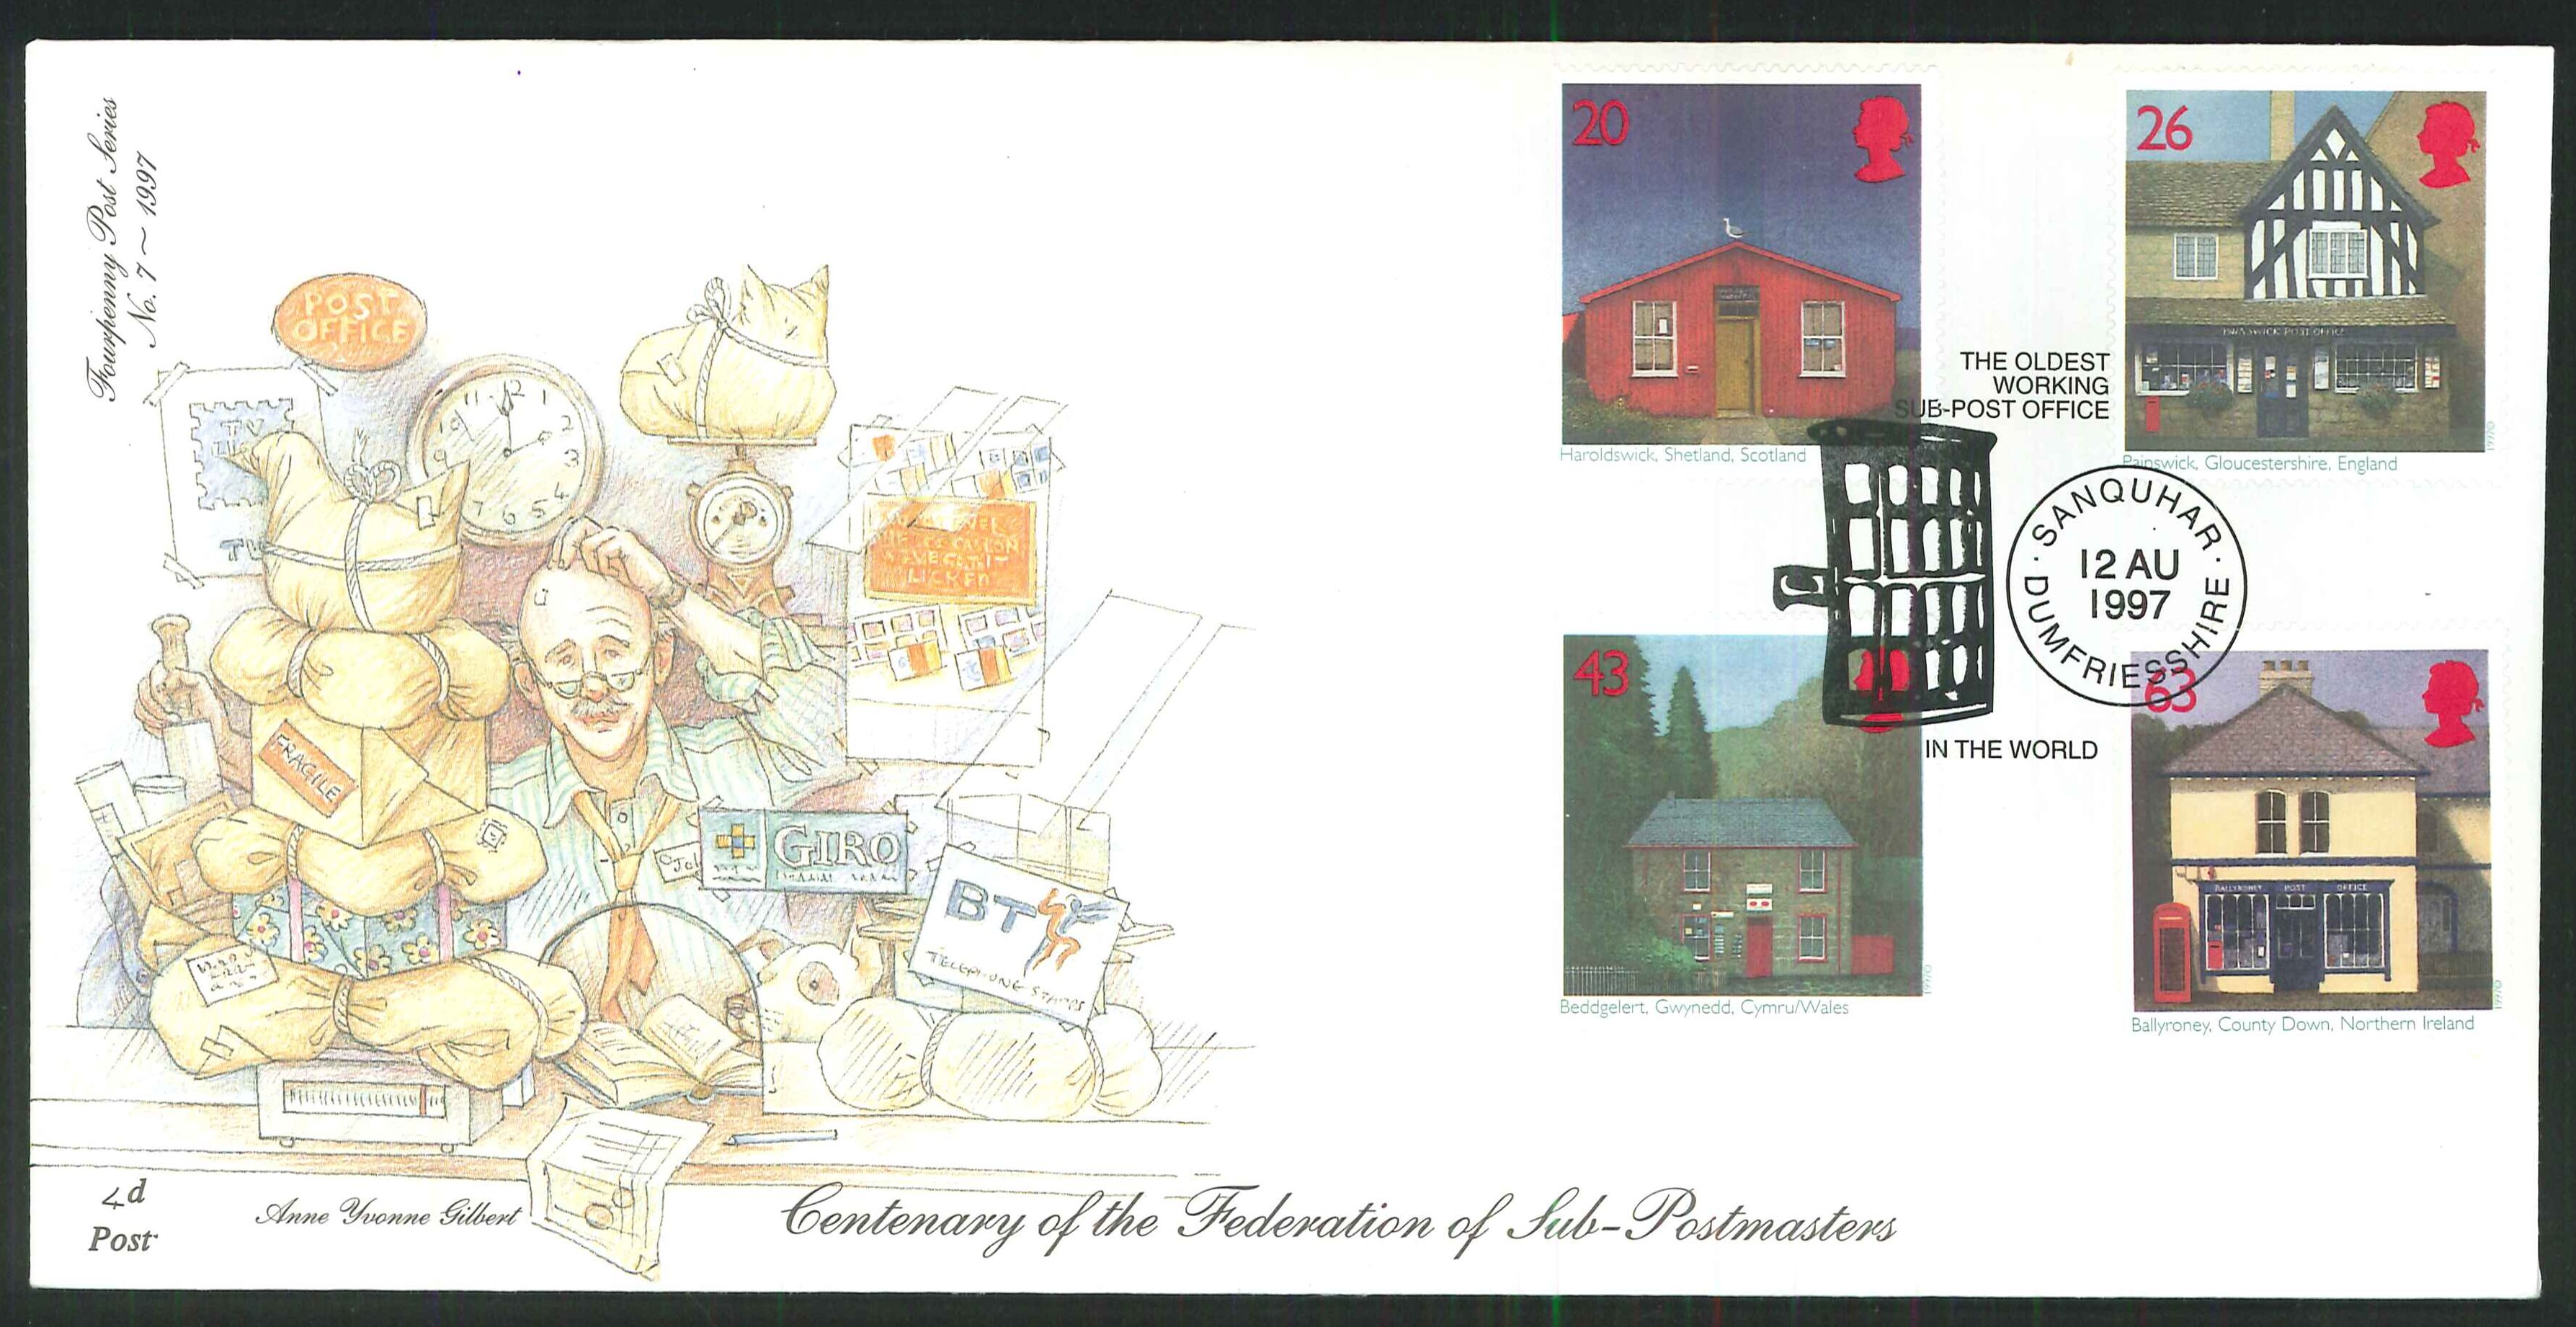 1997 - Centenary of the Federation of Sub Postmasters, Sanquhar, Dumfrieshire Postmark - Click Image to Close